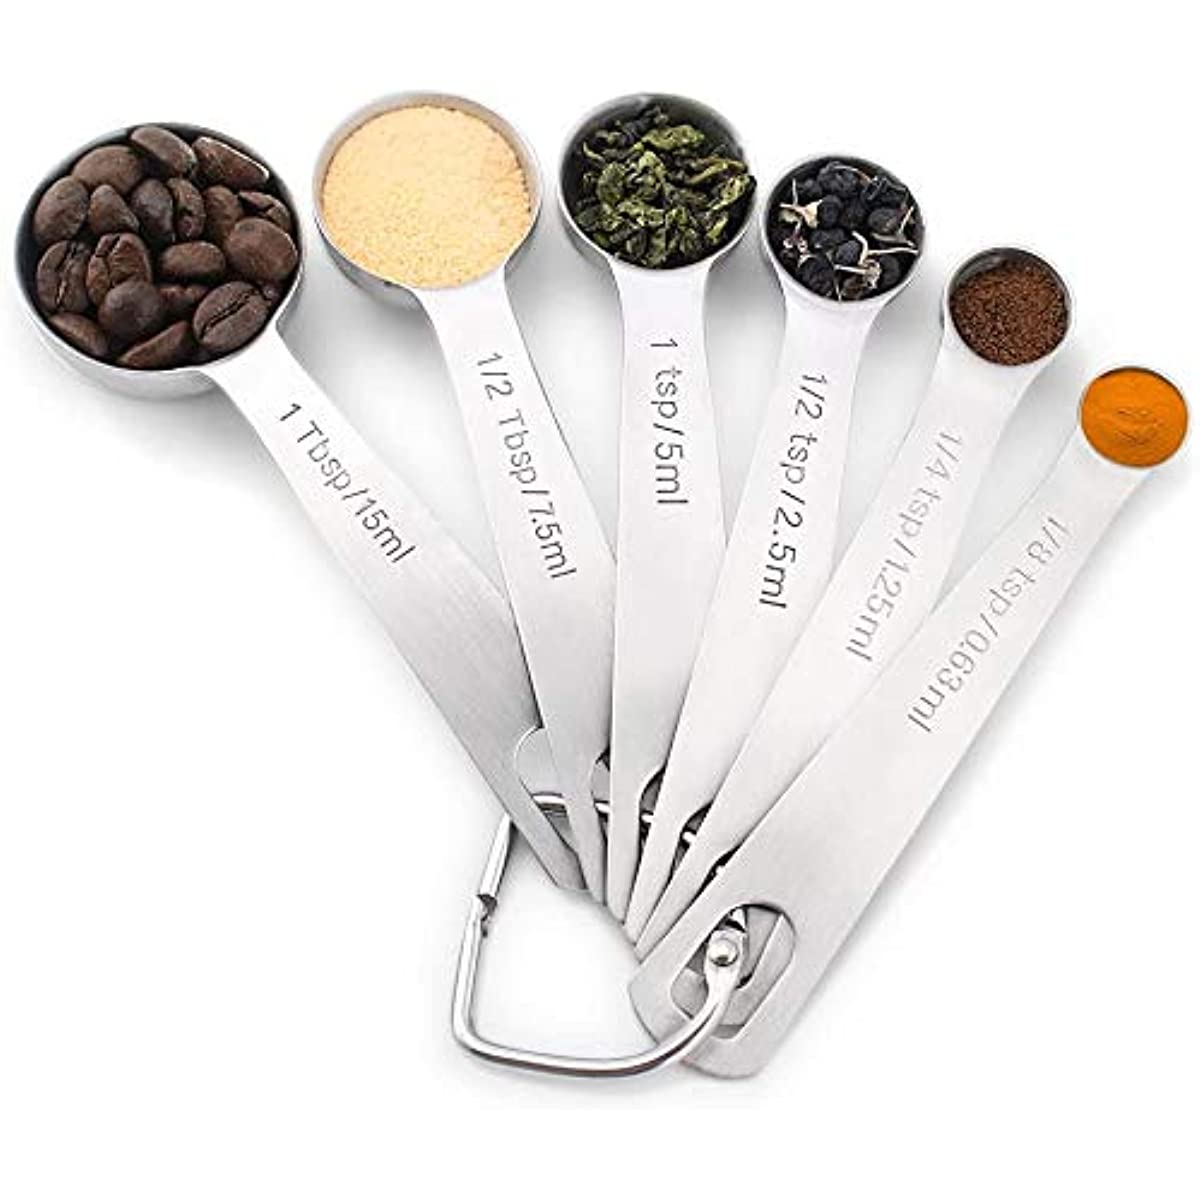 Adjustable Measuring Spoon Set - Party Time, Inc.